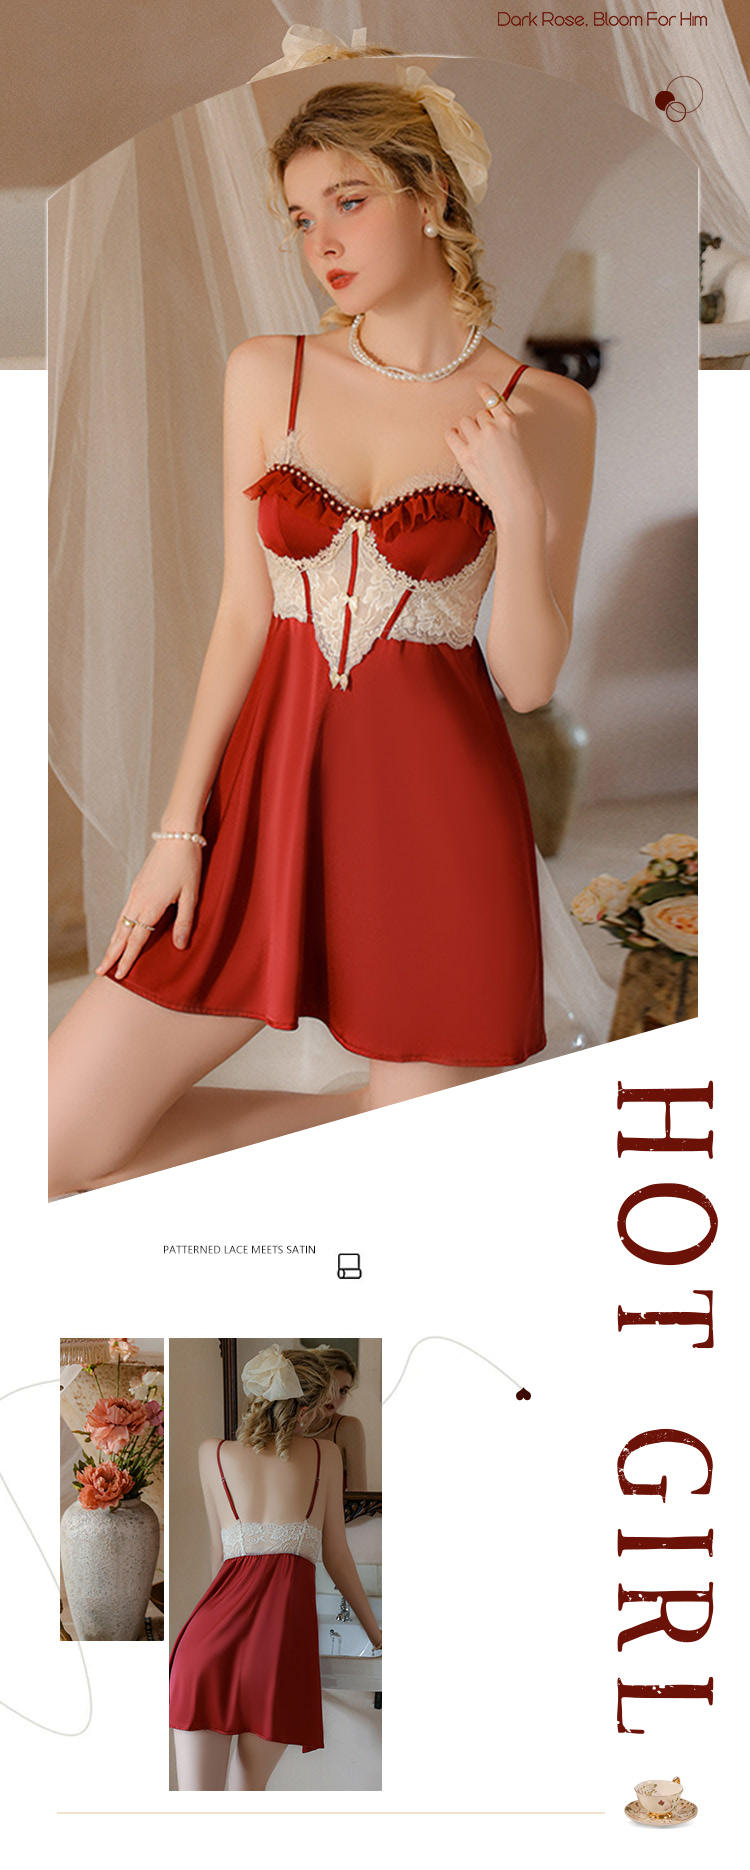 Low-Cut-V-neck-Red-Lace-Open-Back-Slip-Nightgown-Chemise-Slip-Dress06